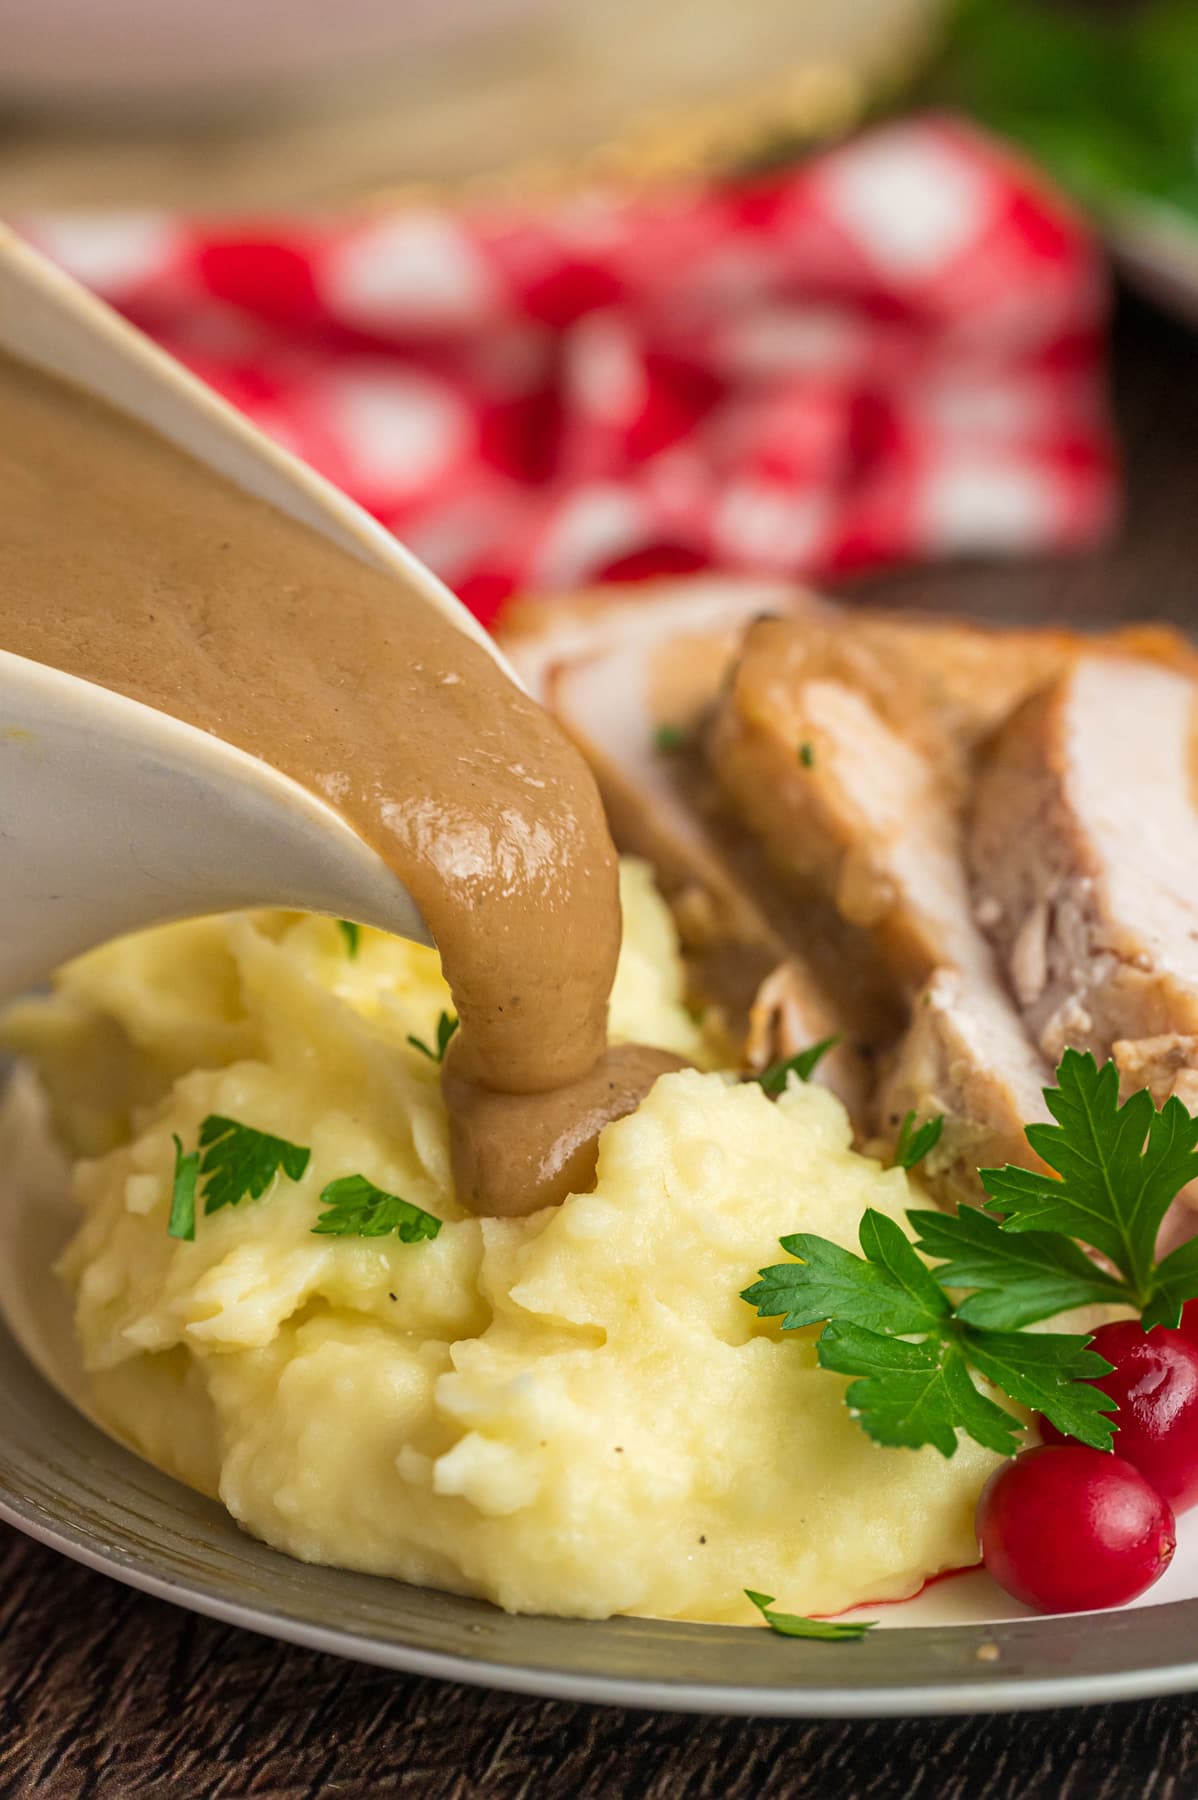 Gravy being poured over mashed potatoes on a plate with slices of turkey